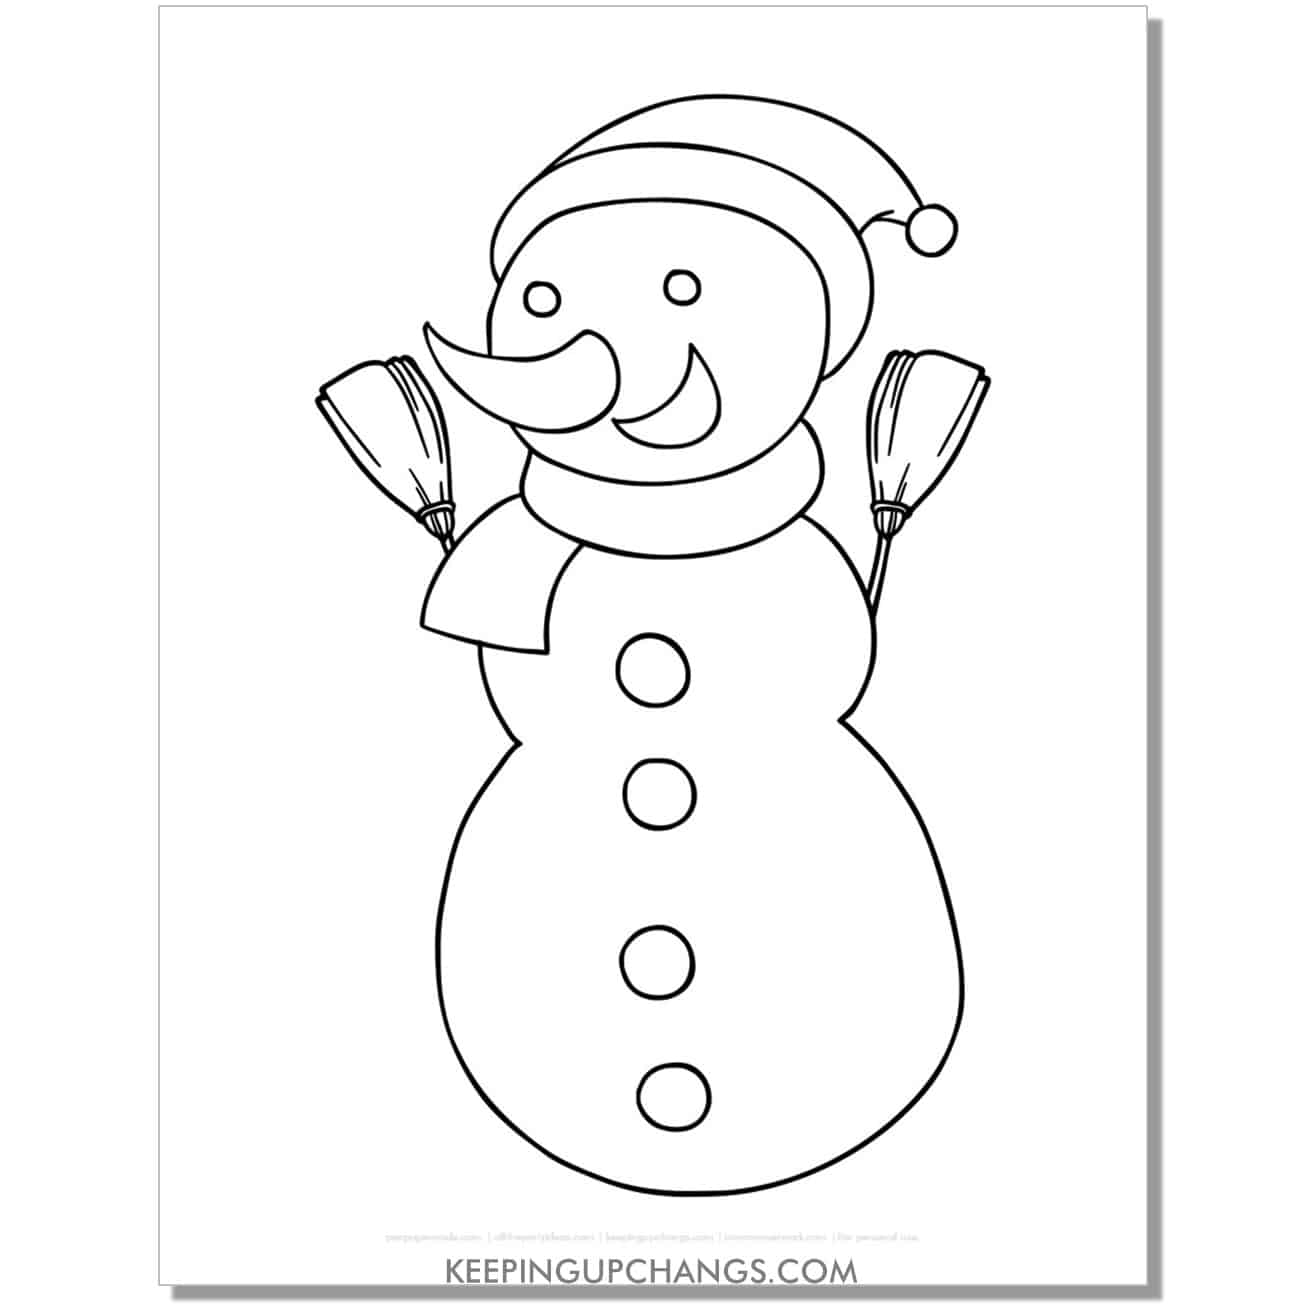 free snowman with broomstick arms coloring page.